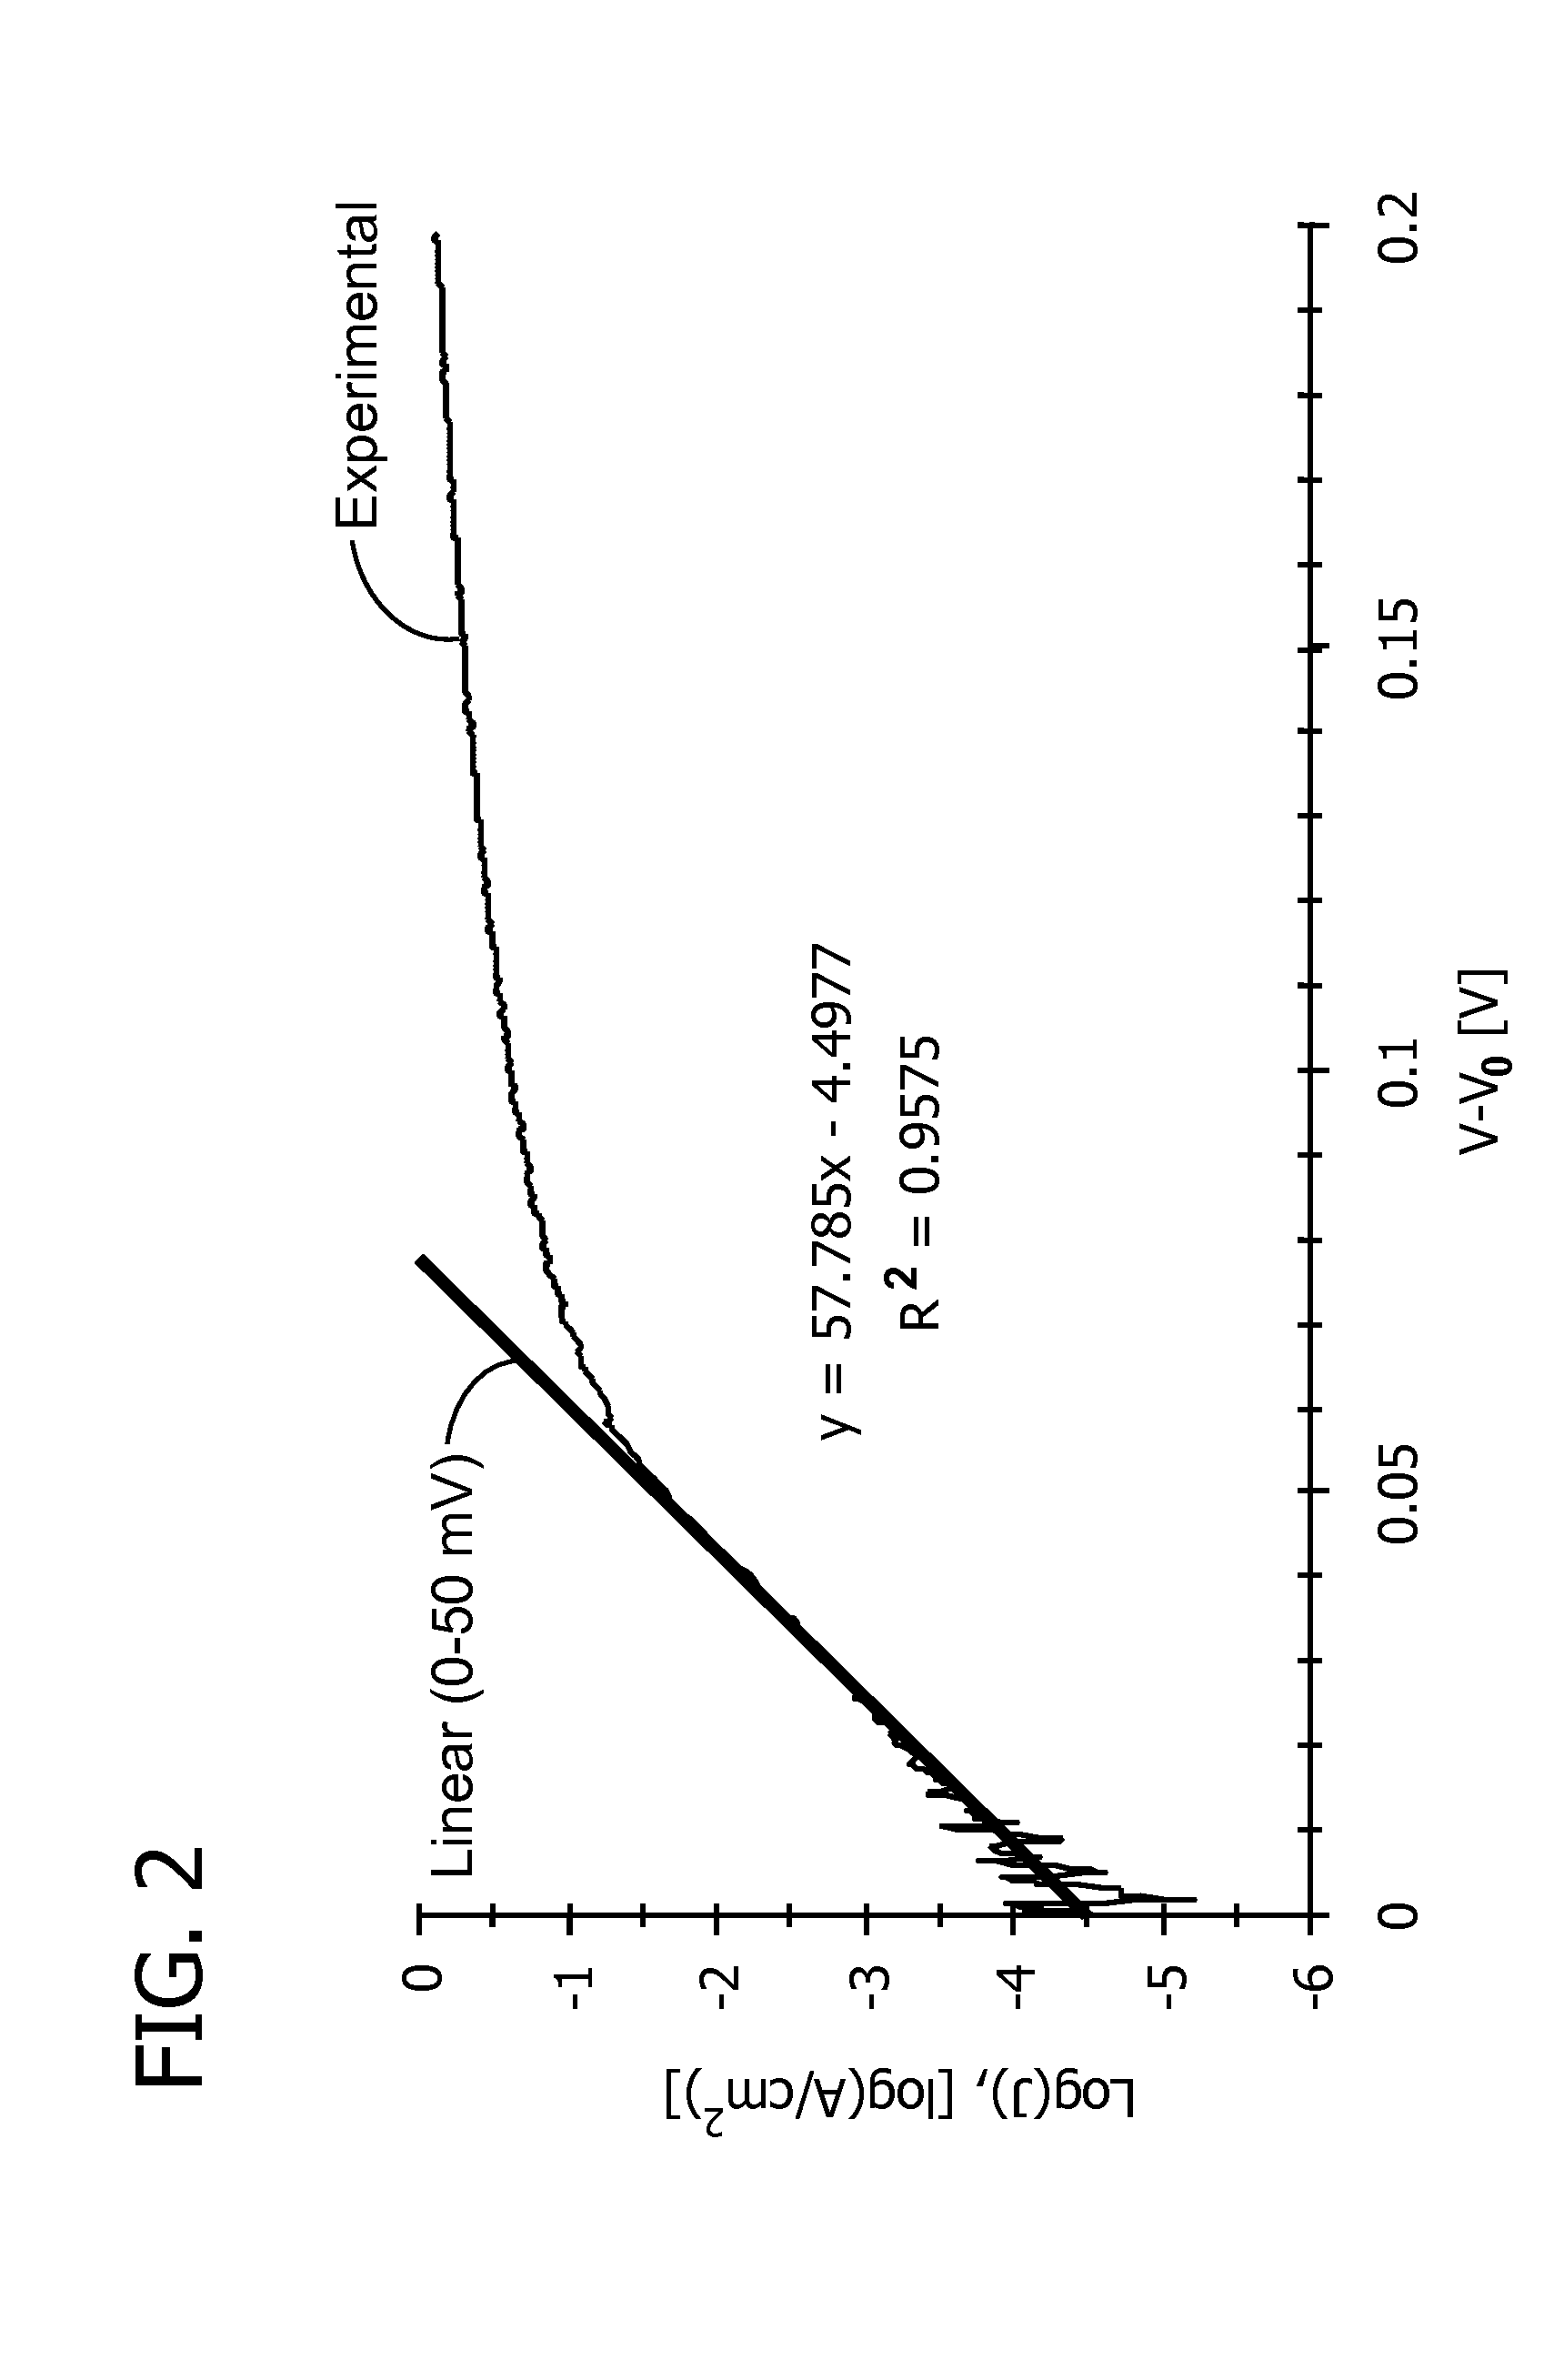 Composites and electrodes for electrochemical devices and processes for producing the same